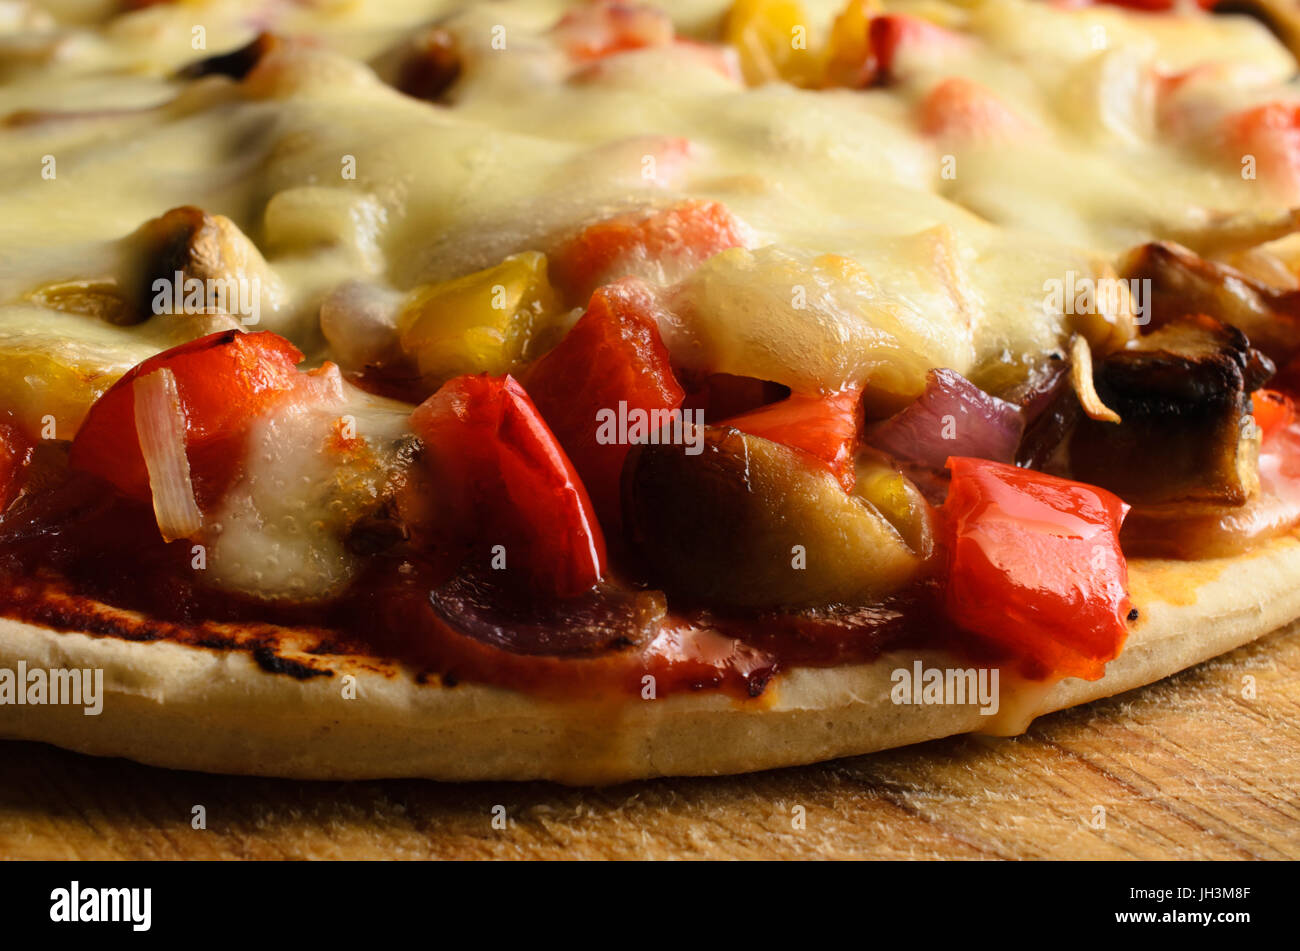 Close up (macro) of a cooked vegetarian pizza, with red and yellow peppers, onions, mushrooms and mozzarella cheese. Stock Photo